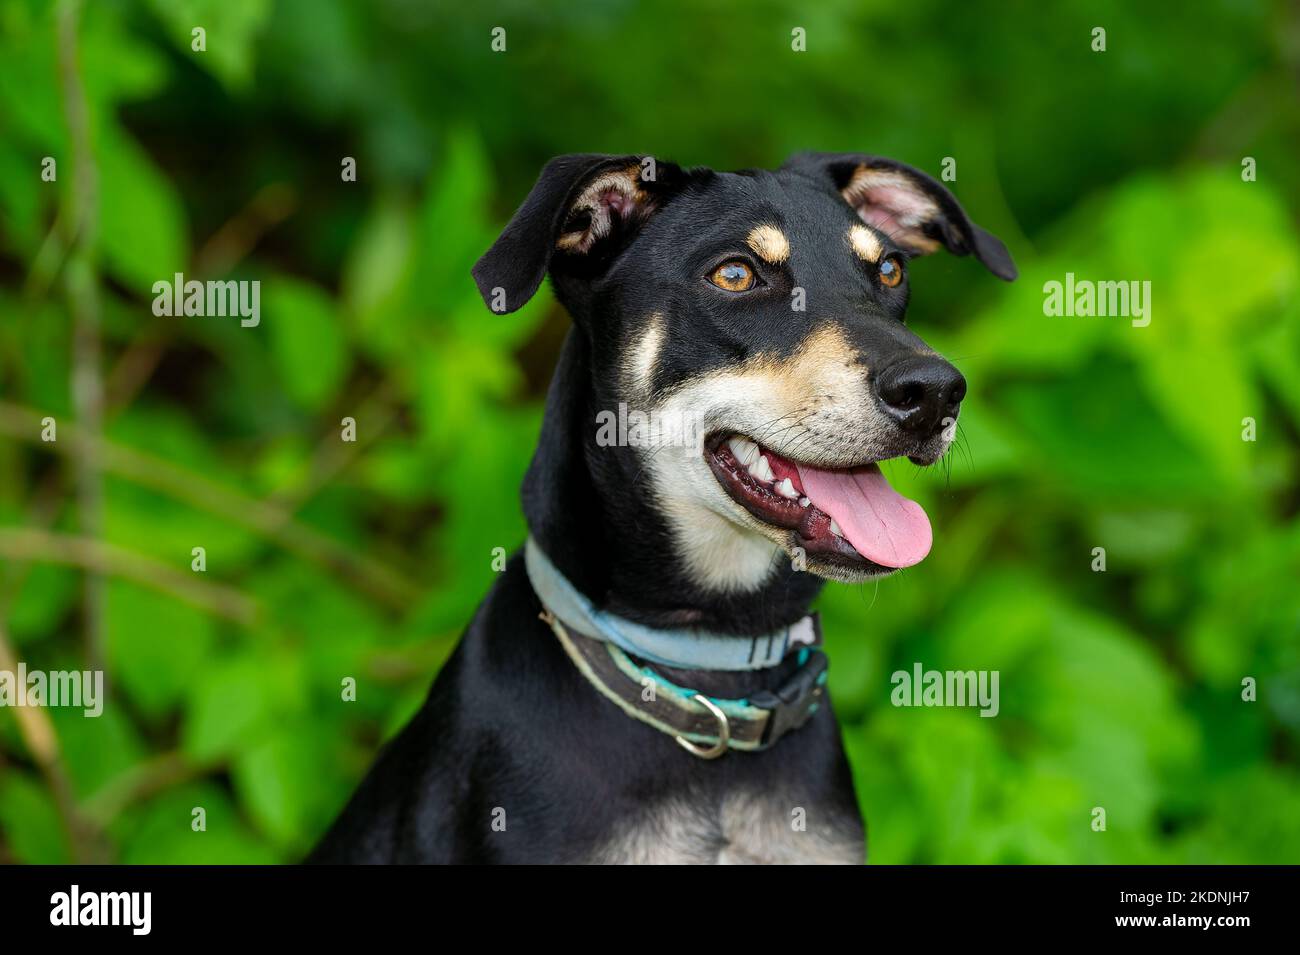 A Doberman Pinscher Dog Is Outdoors With A Green Nature Background Stock Photo